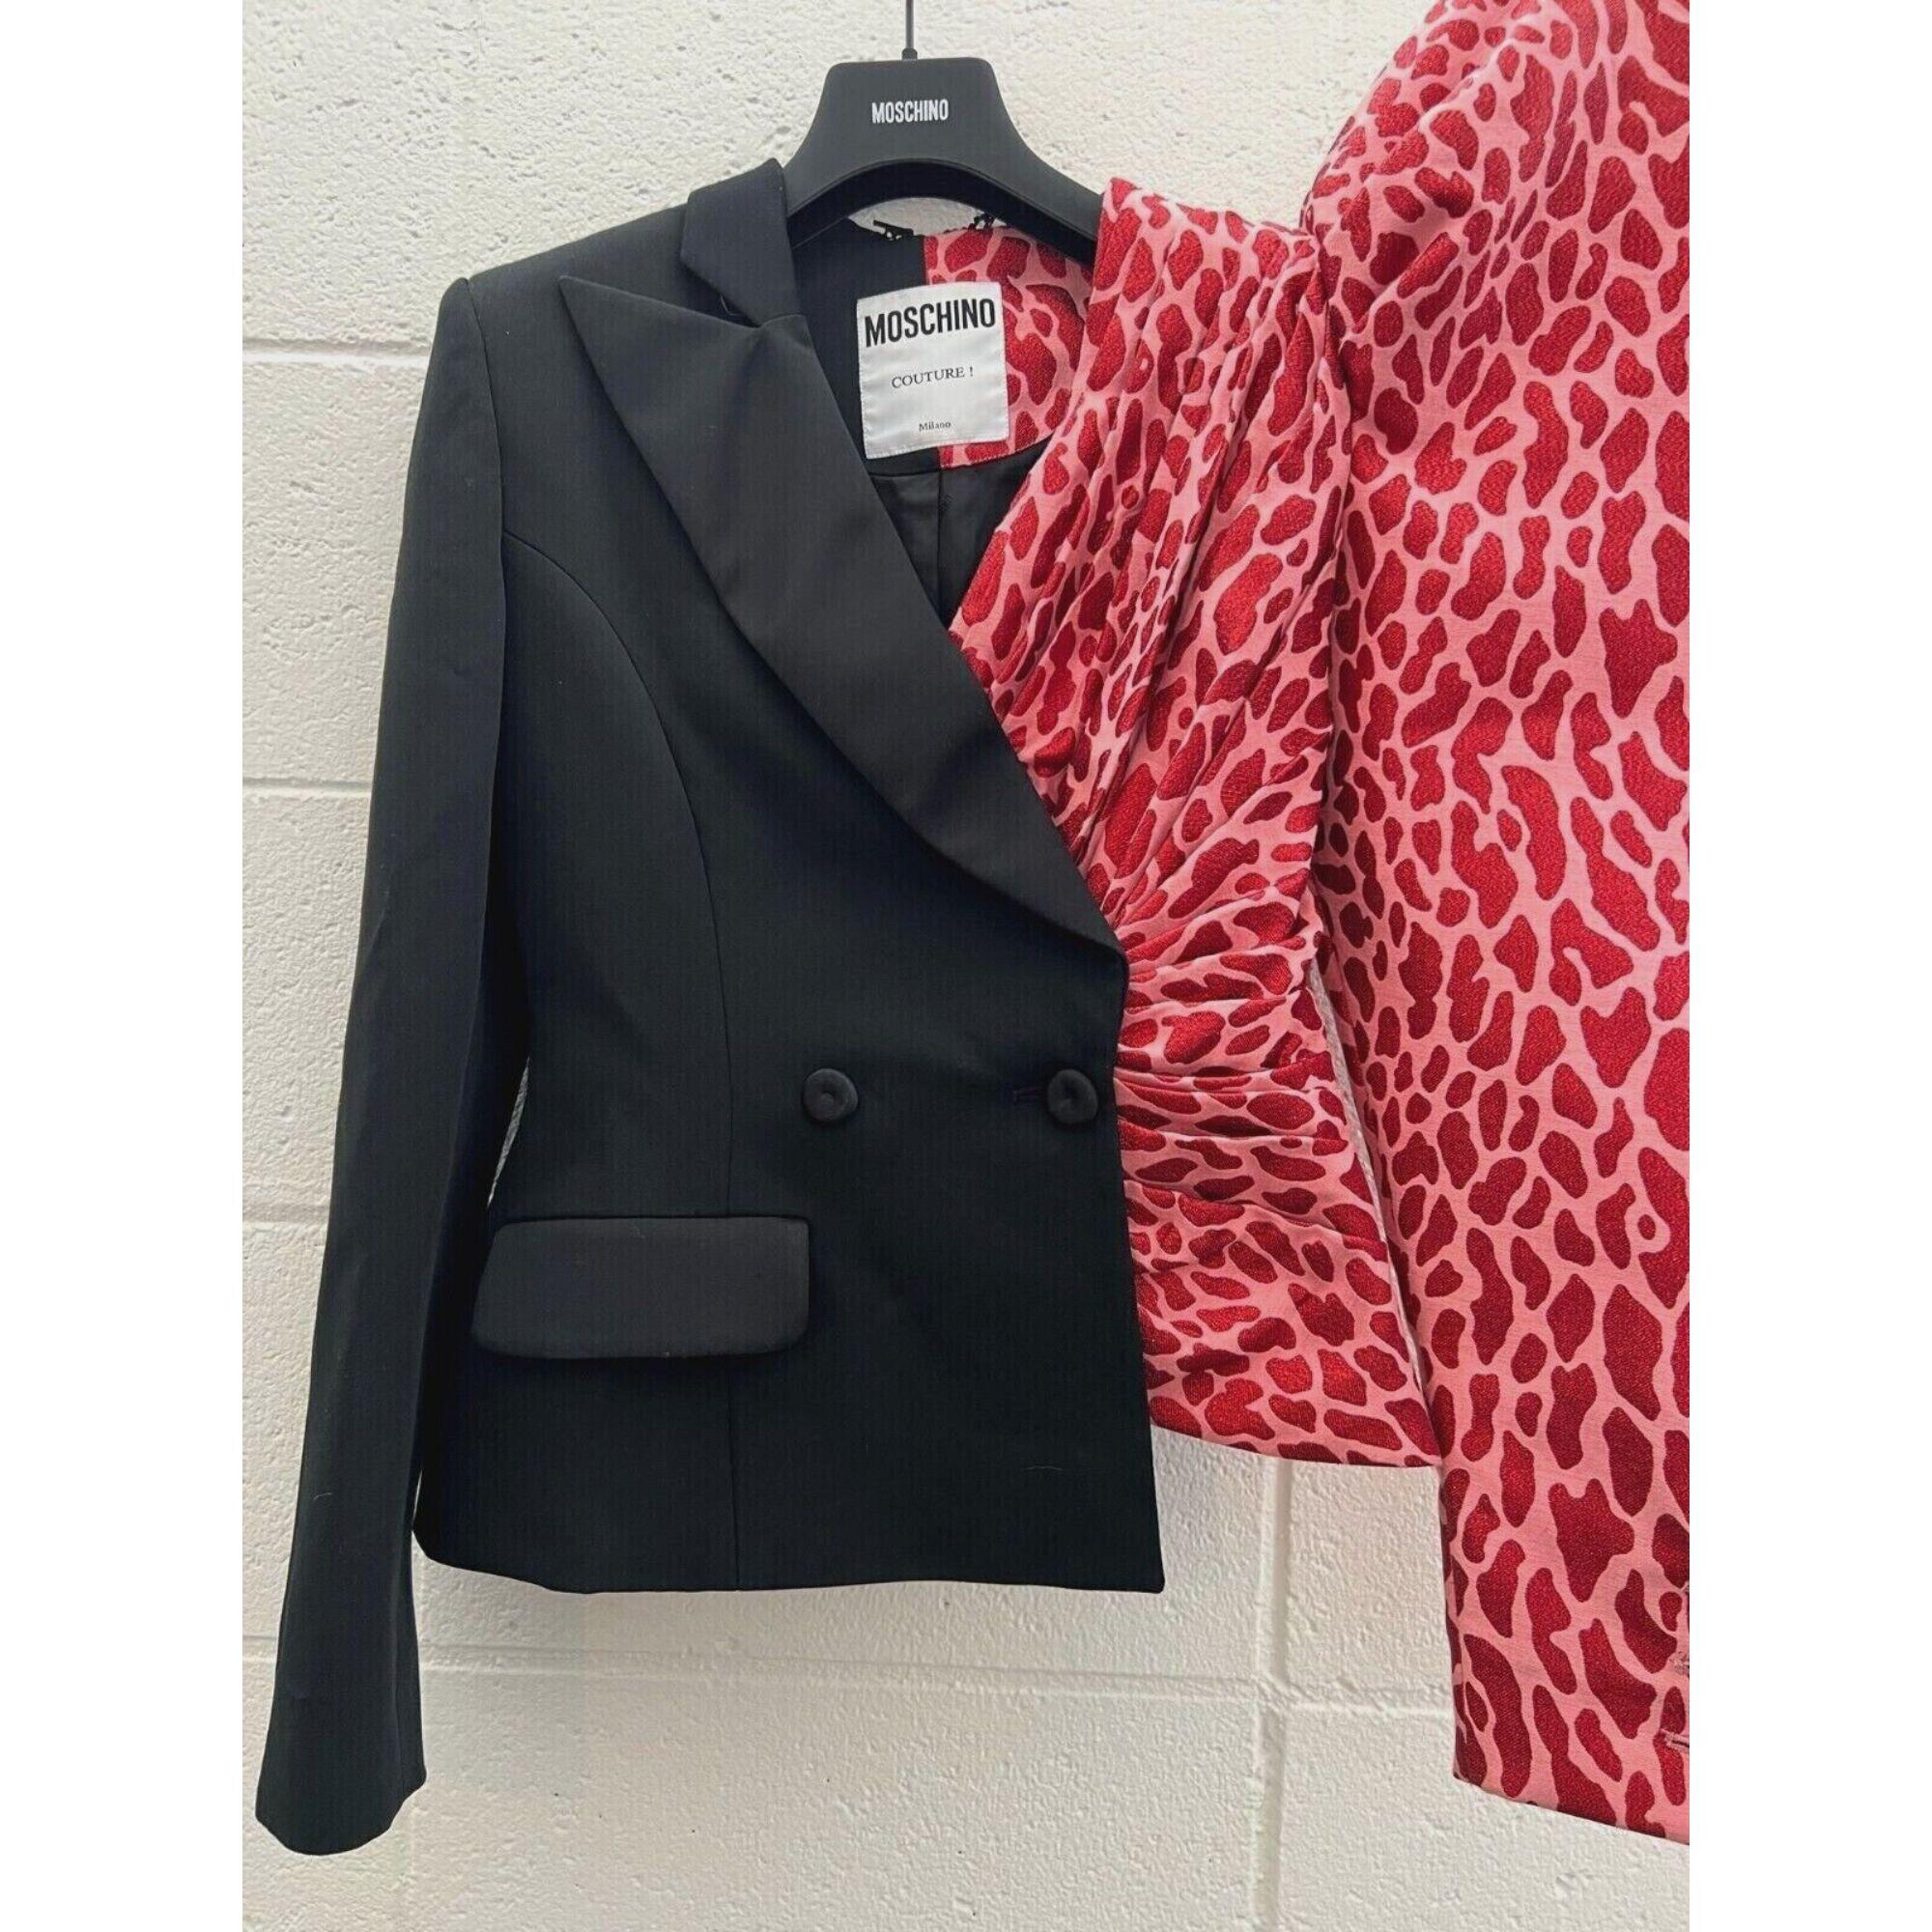 AW21 Moschino Couture Jeremy Scott Jacket Half Black Half Pink Leopard Spots

Additional Information:
Material: 60% AC, 40% CU
Color: Black, Red, Pink
Size: IT 40 / US 6
Style: Blazer
Pattern: Asymmetric, Leopard Print
Dimensions: Shoulder to